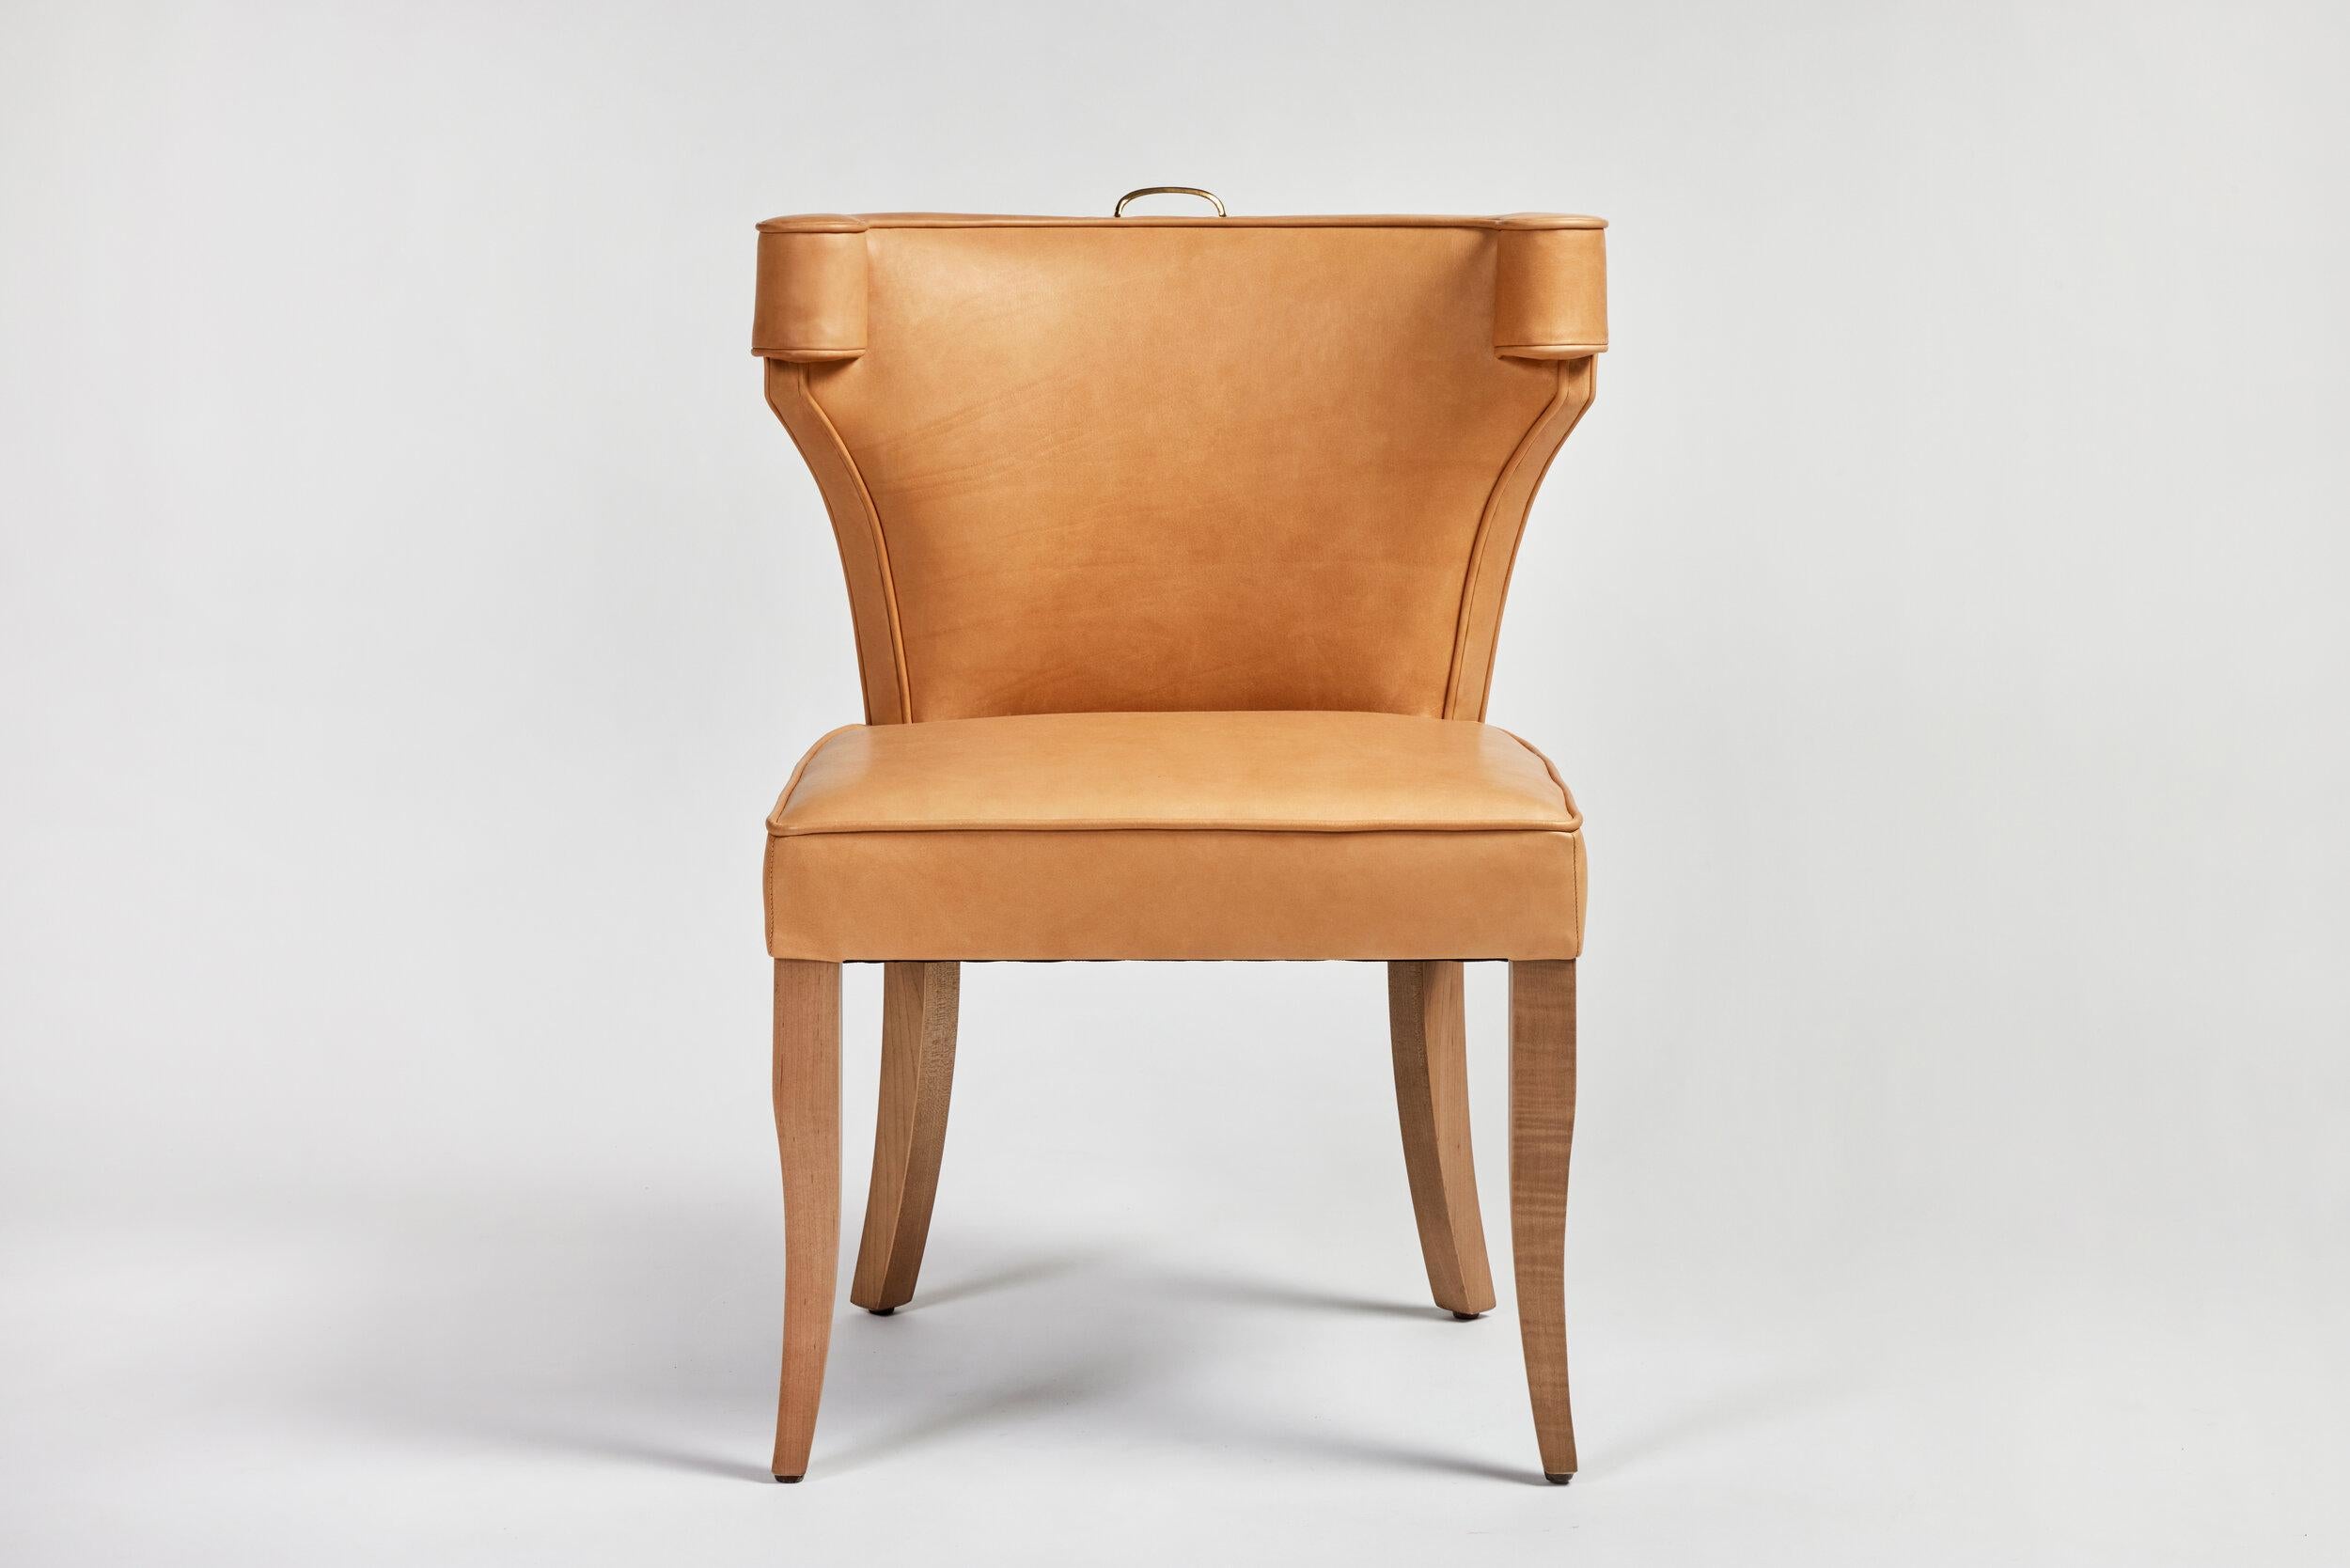 Martin & Brockett’s Hale Chair features a fully upholstered, curved back with saber legs and an unlacquered brass handle detail. Brass nail head trim option available for order.

H 33.5 in. x W 21.5 in. x D 19.5 in.

C.O.M. only -3 yards

Other wood